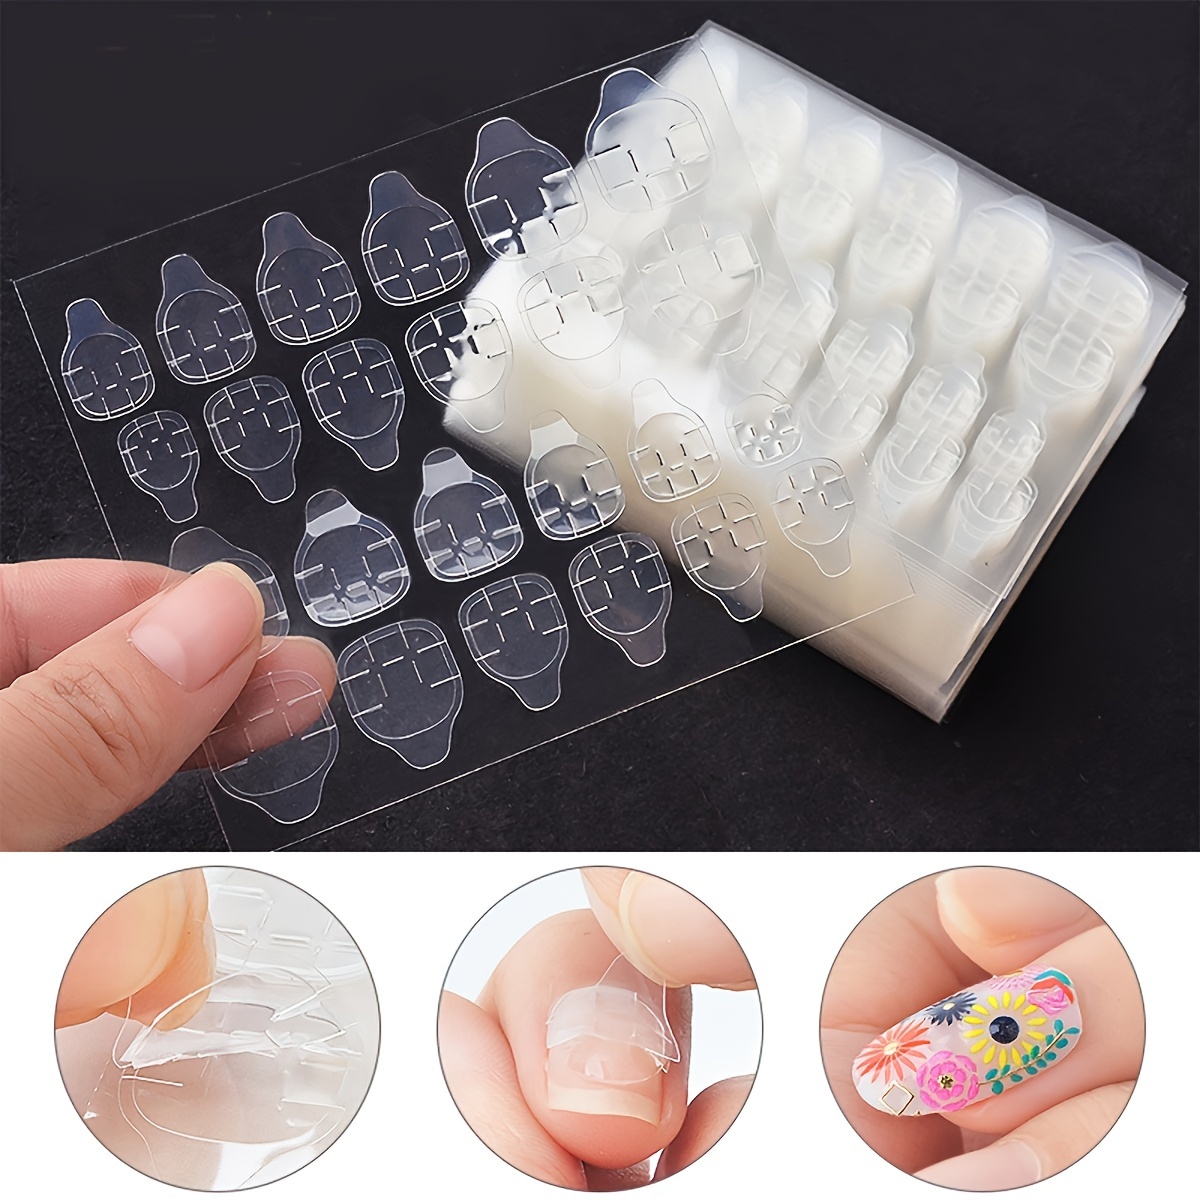 

Double-sided Jelly Glue Nail Patches, High Viscosity Fake Nail Adhesive, Waterproof & Durable, Ultra-thin Nail Enhancement Strips For Easy Removal